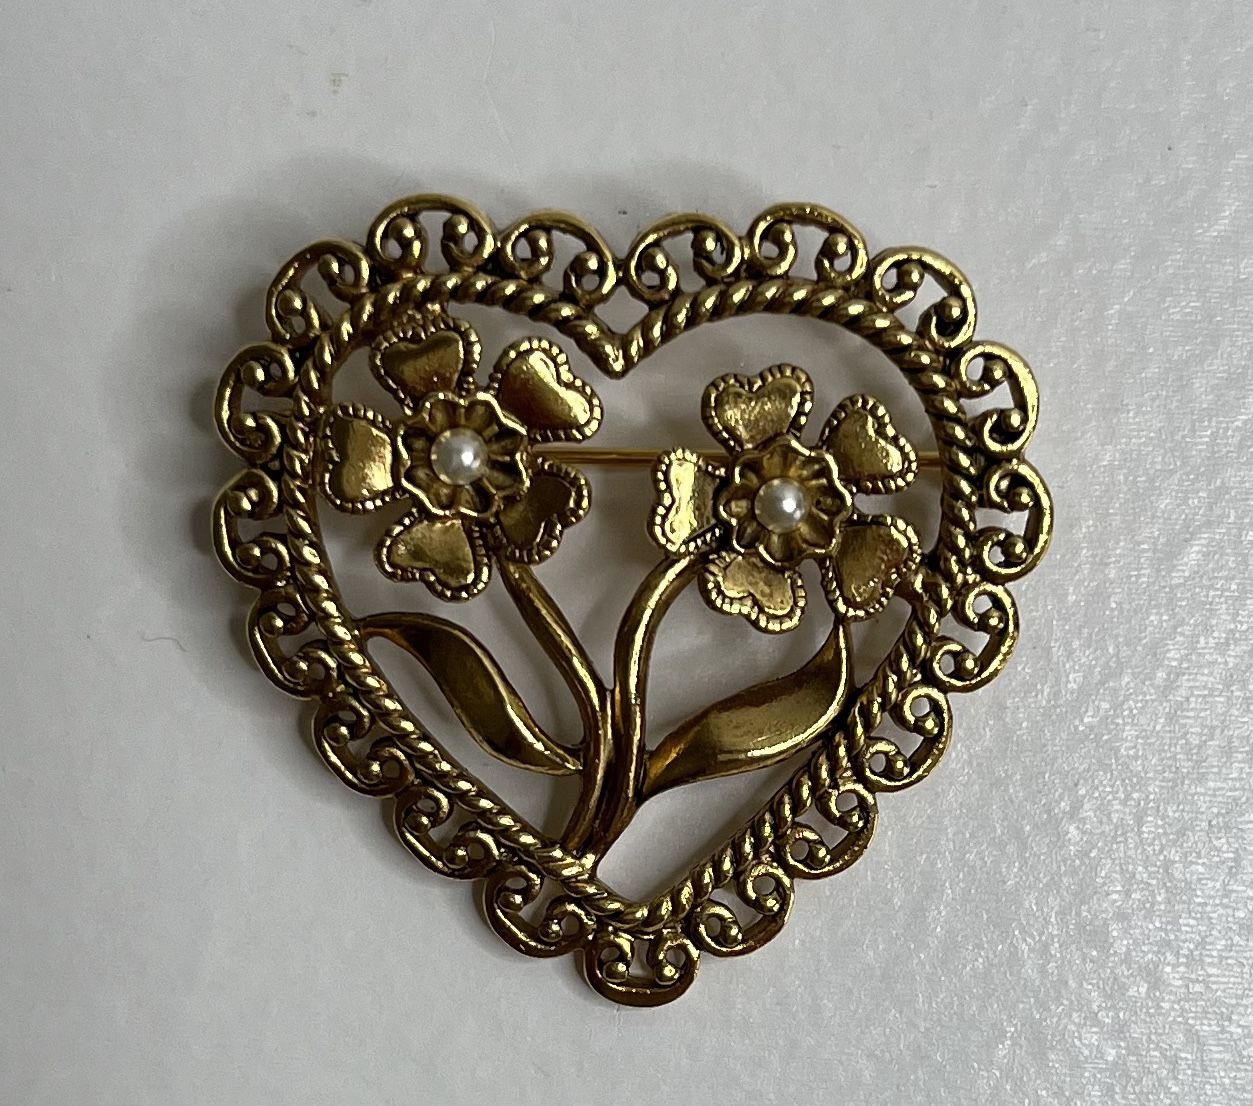 Vintage Gold Tone Heart Brooch Pin With Two Flowers And Faux White Pearls Filigree Edges